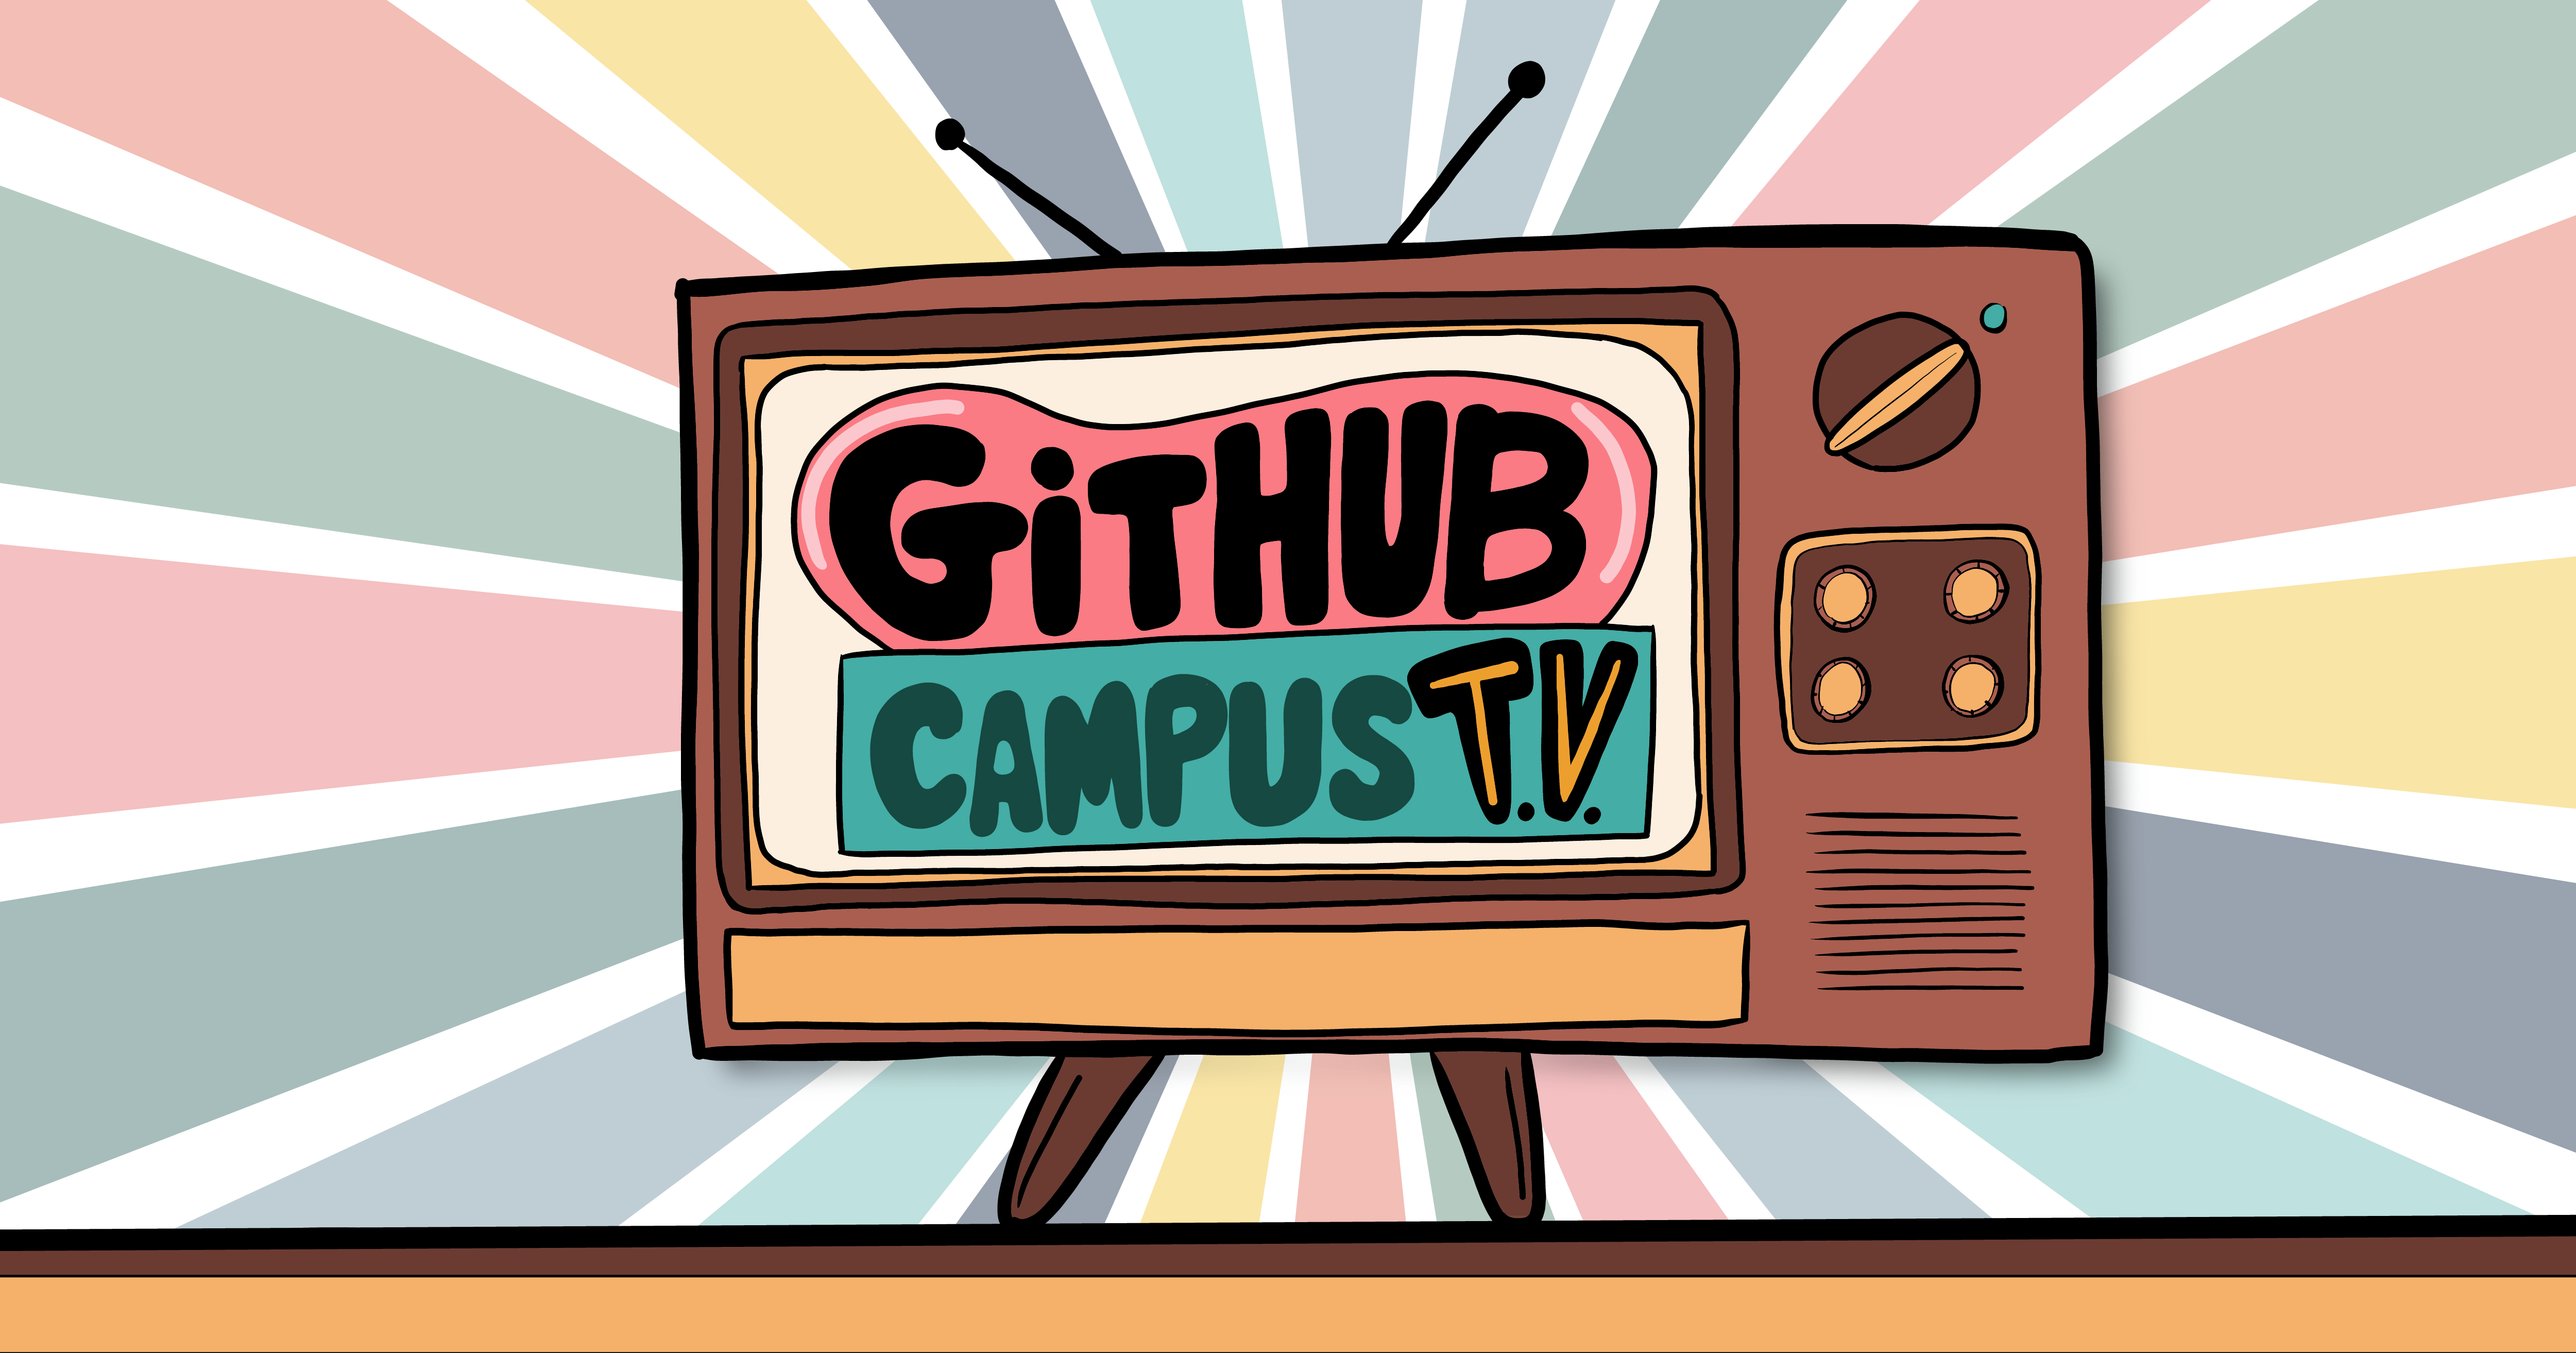 Introducing GitHub Campus TV!